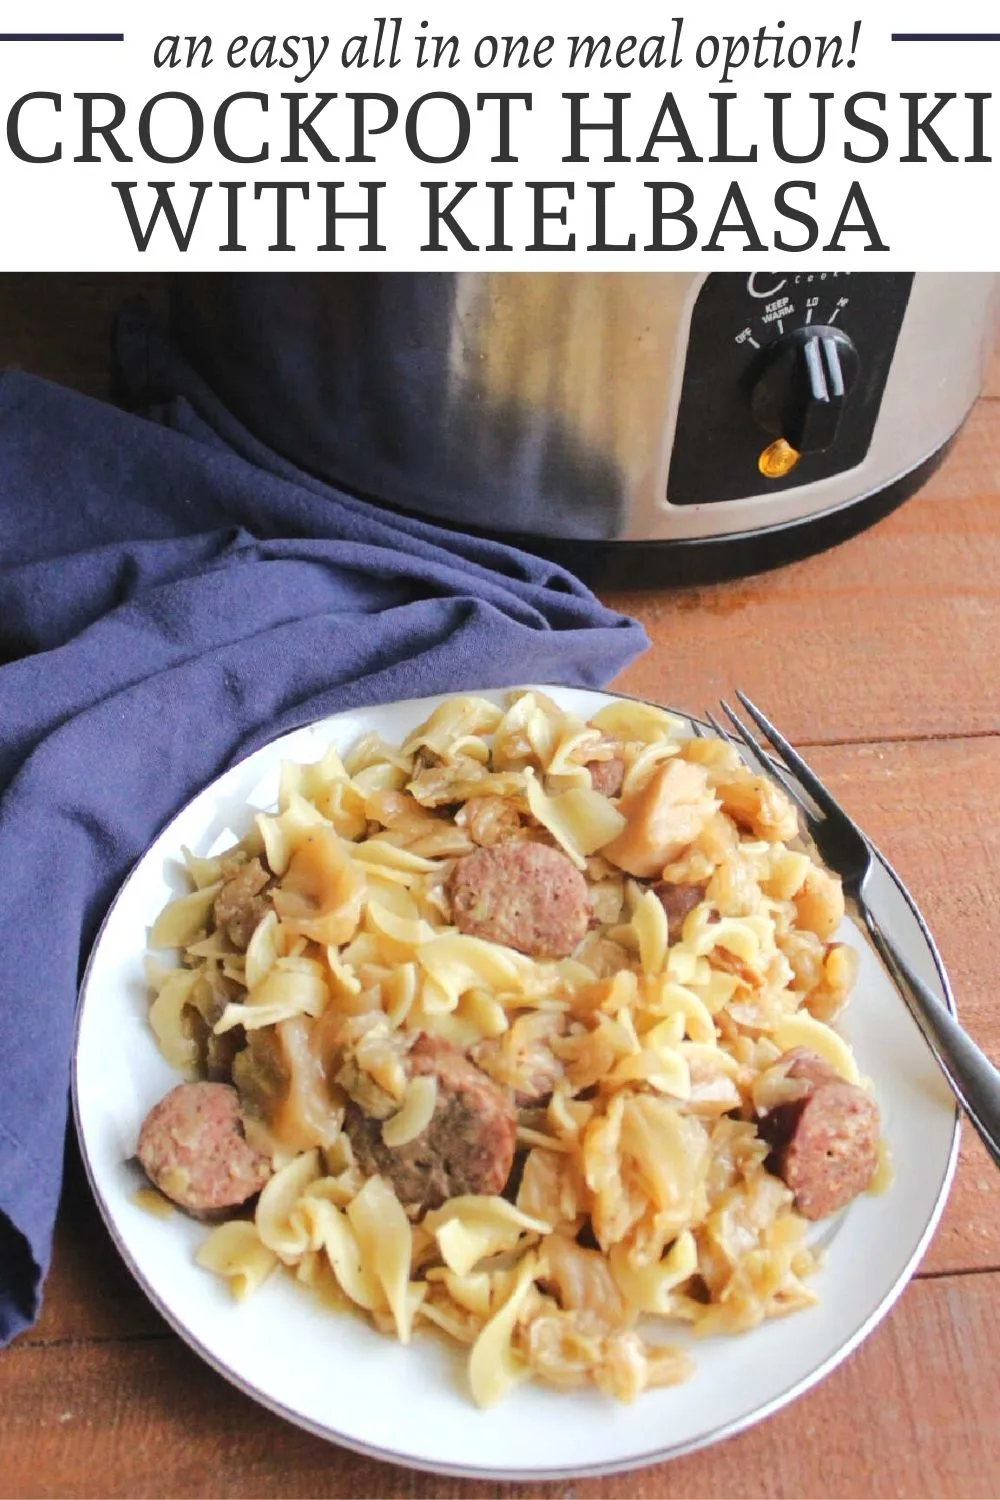 This crockpot haluski recipe combines all of the cabbage, onions, and egg noodles you know and love with the convenience of a slow cooker. Add some kielbasa to make it a whole meal in one. 